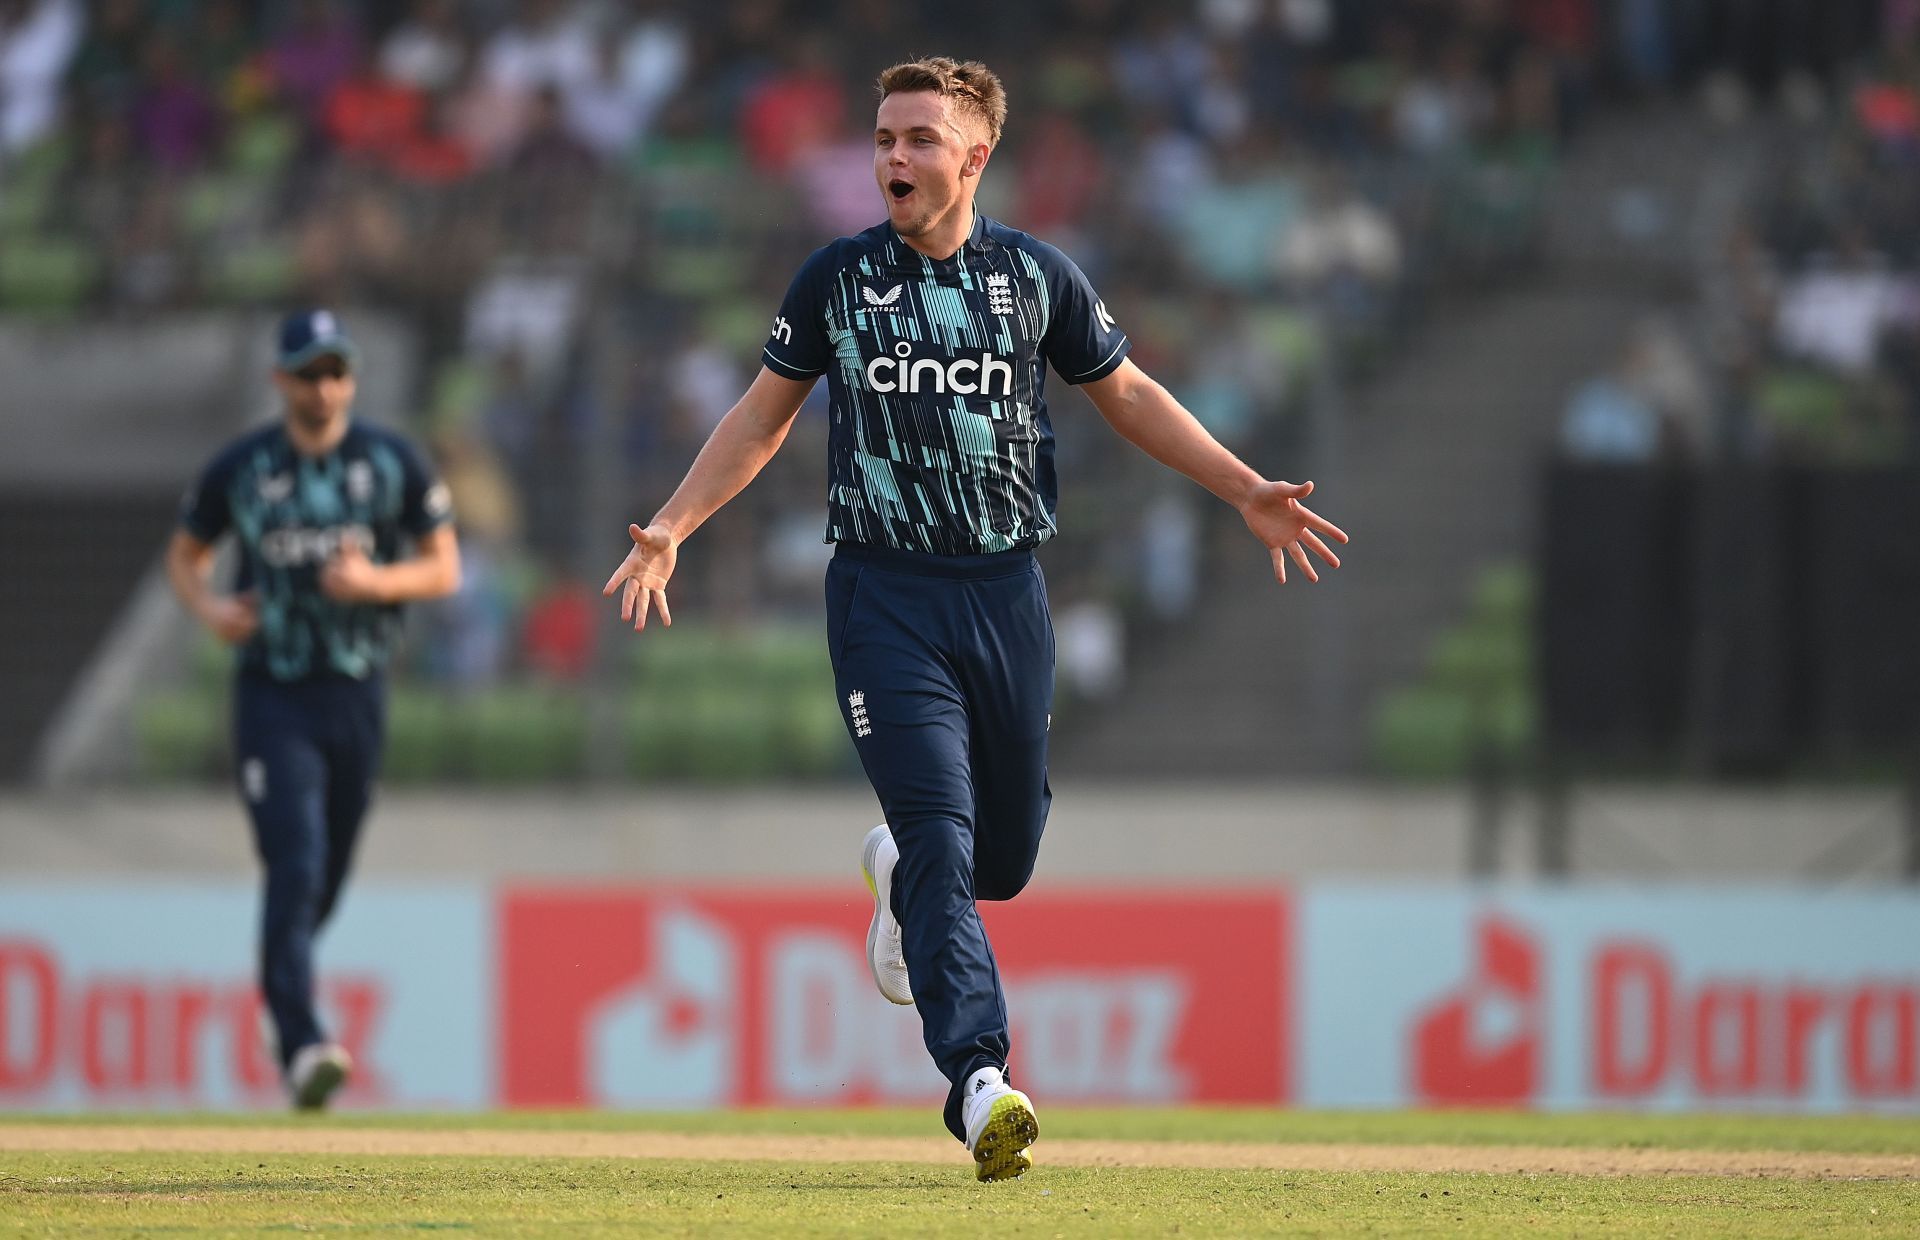 Sam Curran adds more balance and a new dimension to the team